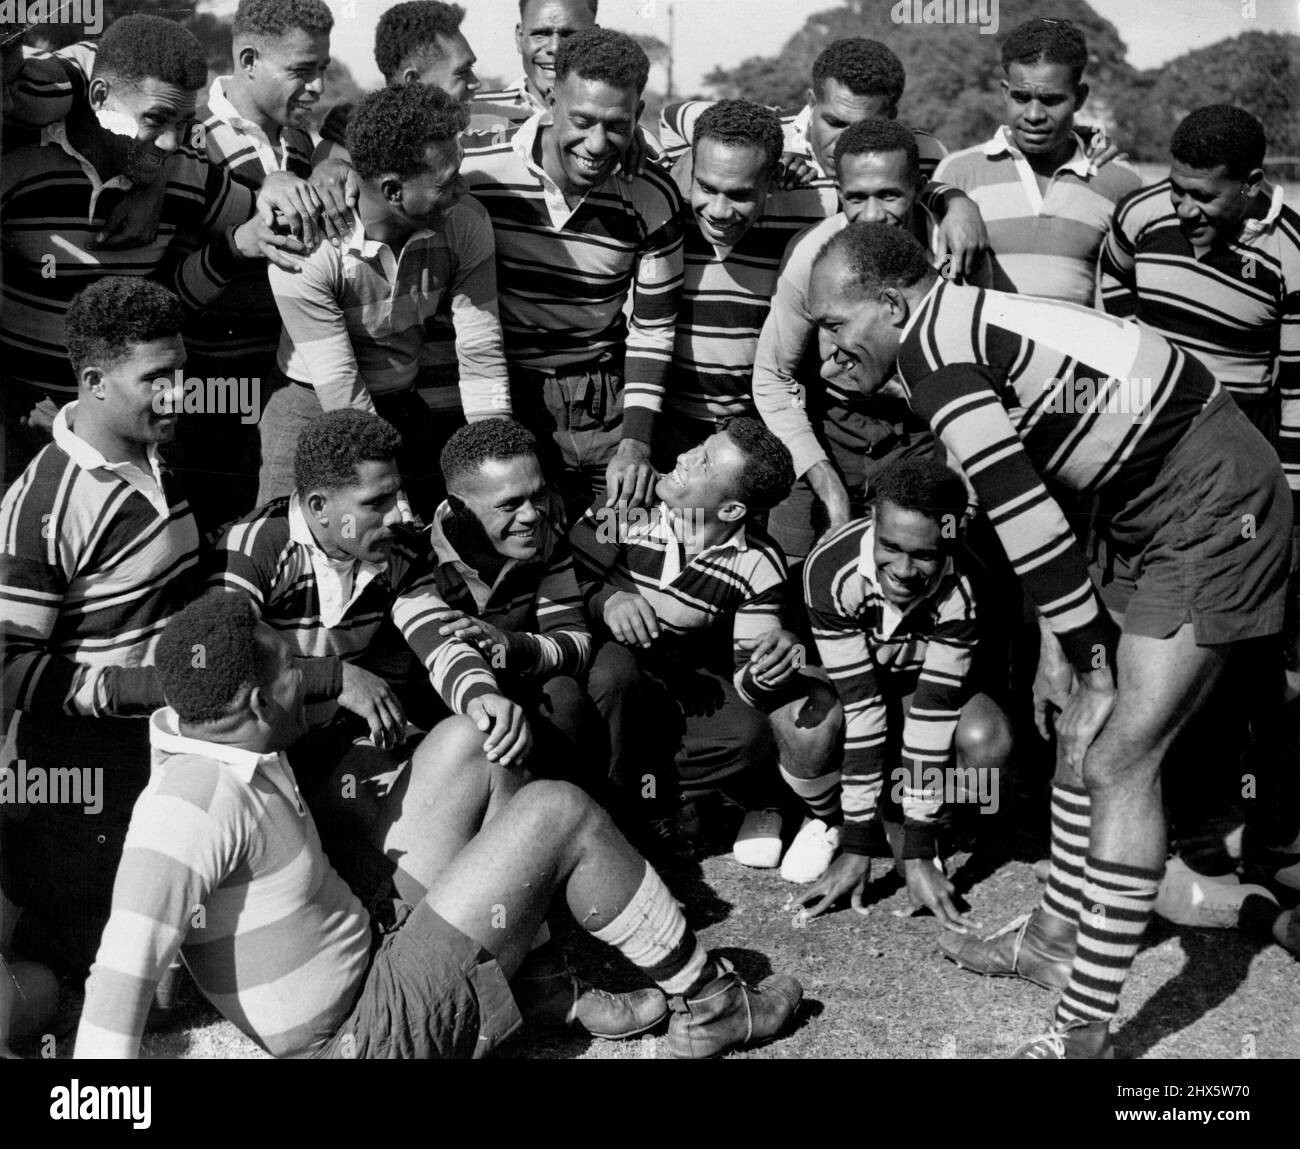 Fijian Rugby Union captain ***** Tuitava has a ***** with his player as tranning at North Sydney Oval. May 20, 1954. Stock Photo